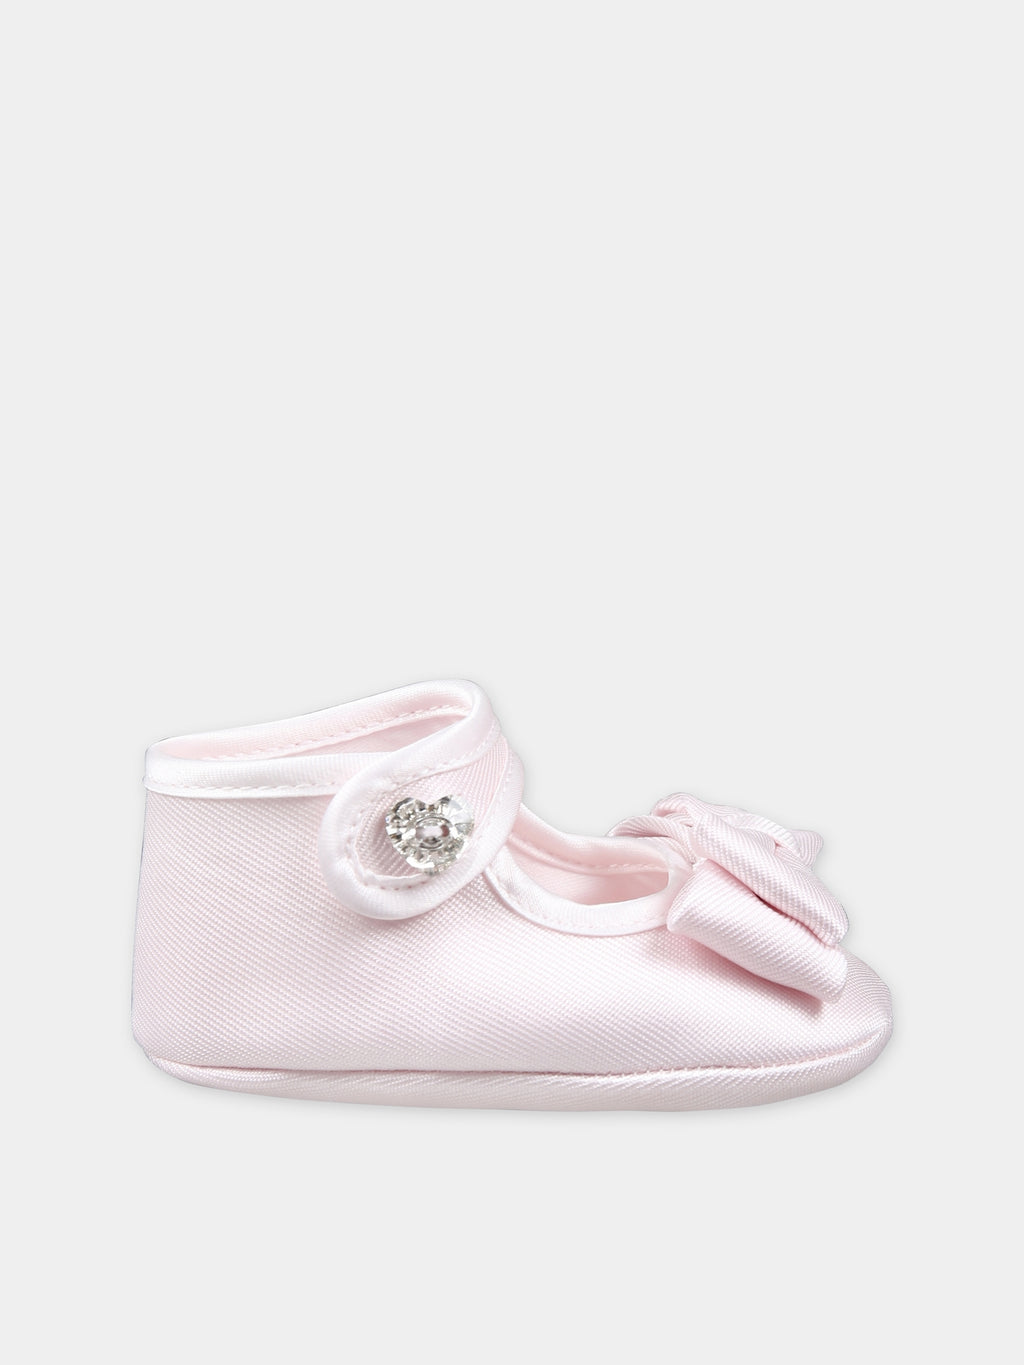 Pink flat shoes for baby girl with bow